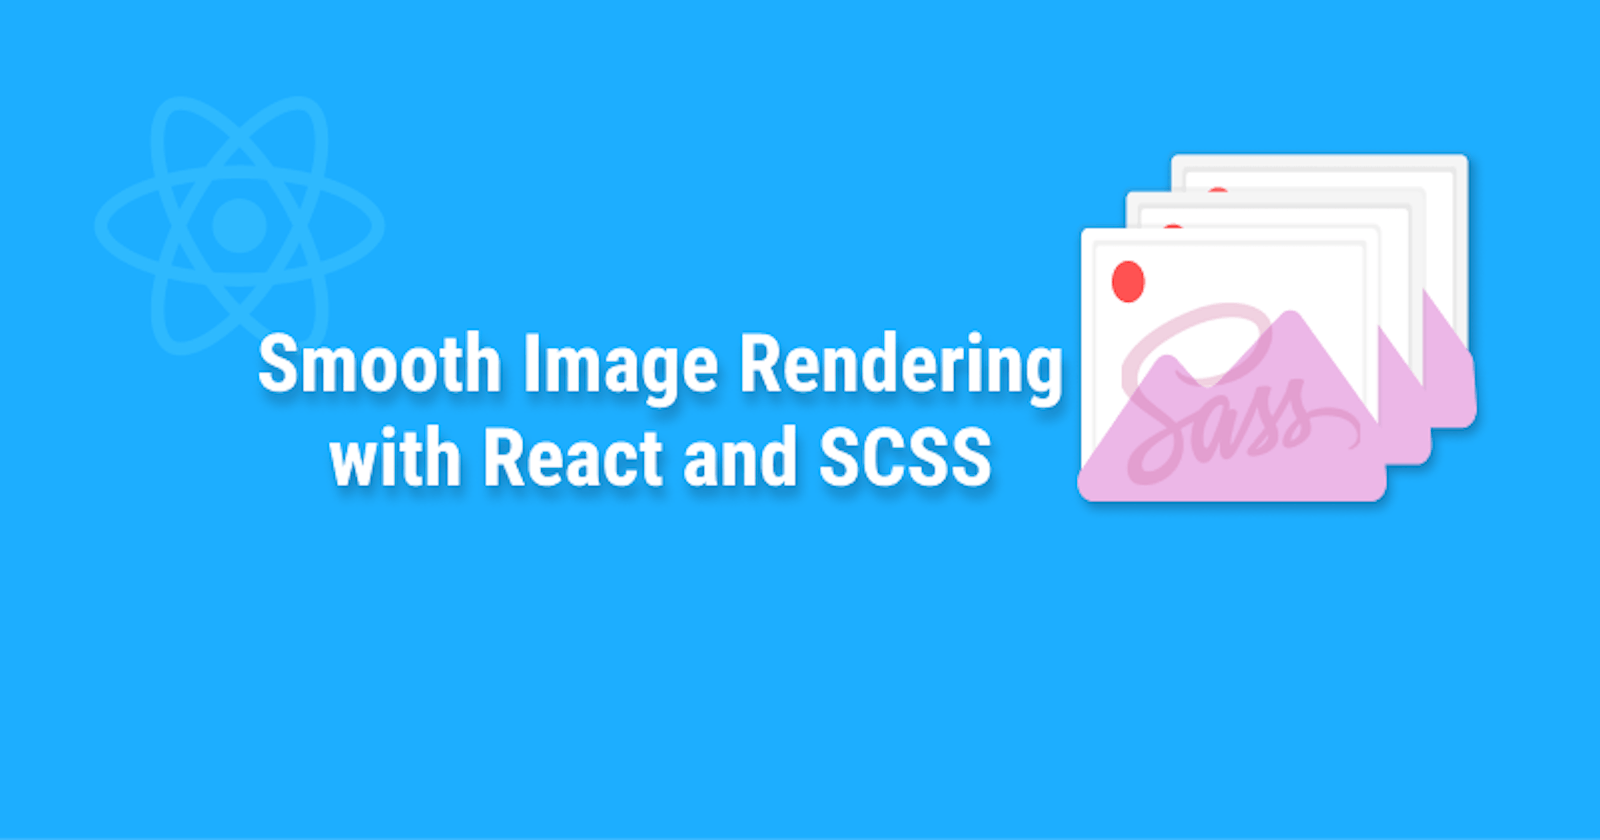 How to Smoothly Render Images in React App?